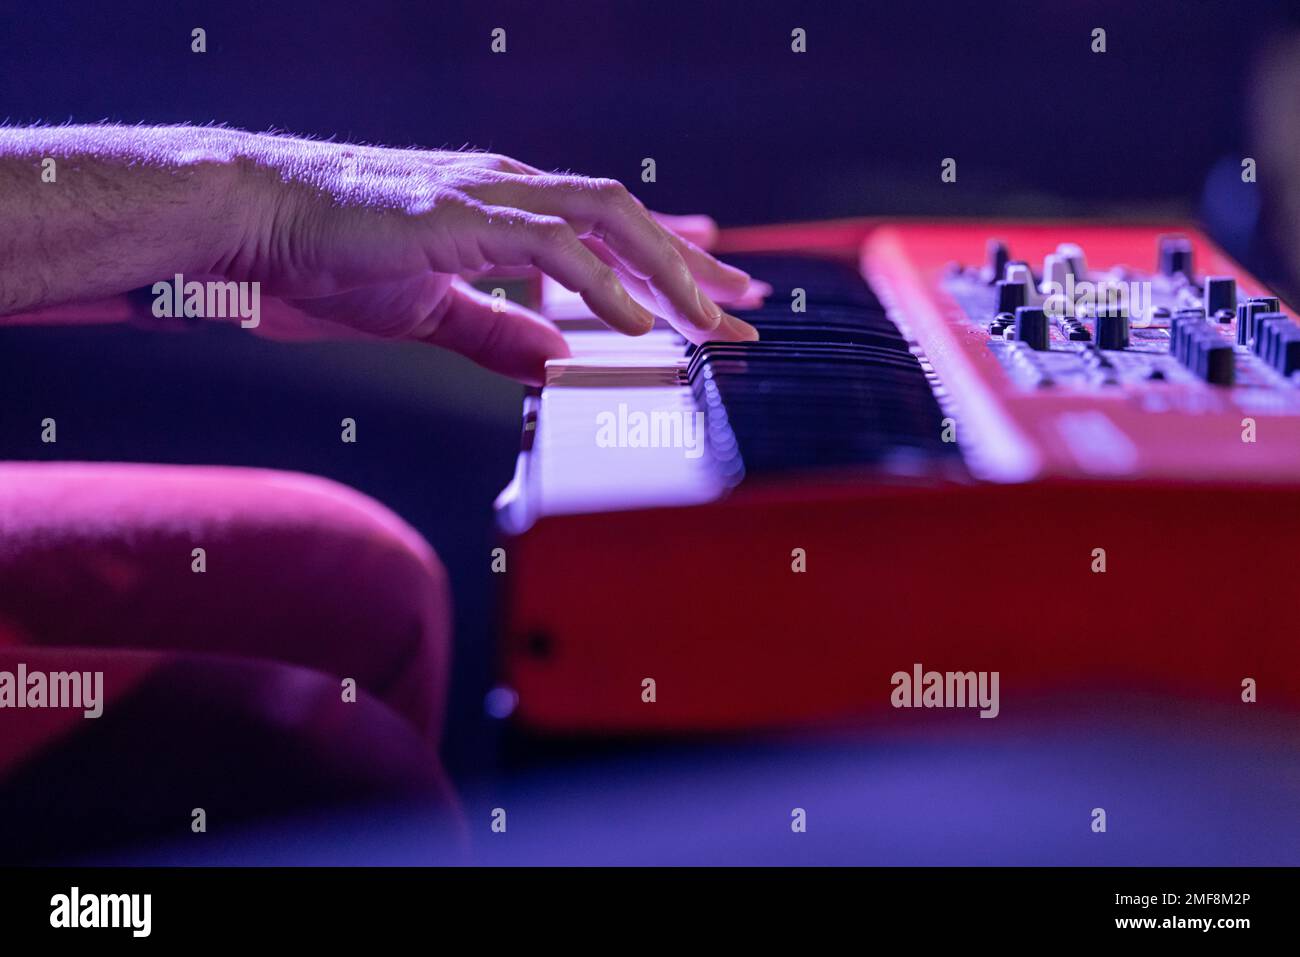 Musician's hands playing an electronic keyboard, synthesizers, at a concert stage. Very shallow depth of field. Stock Photo